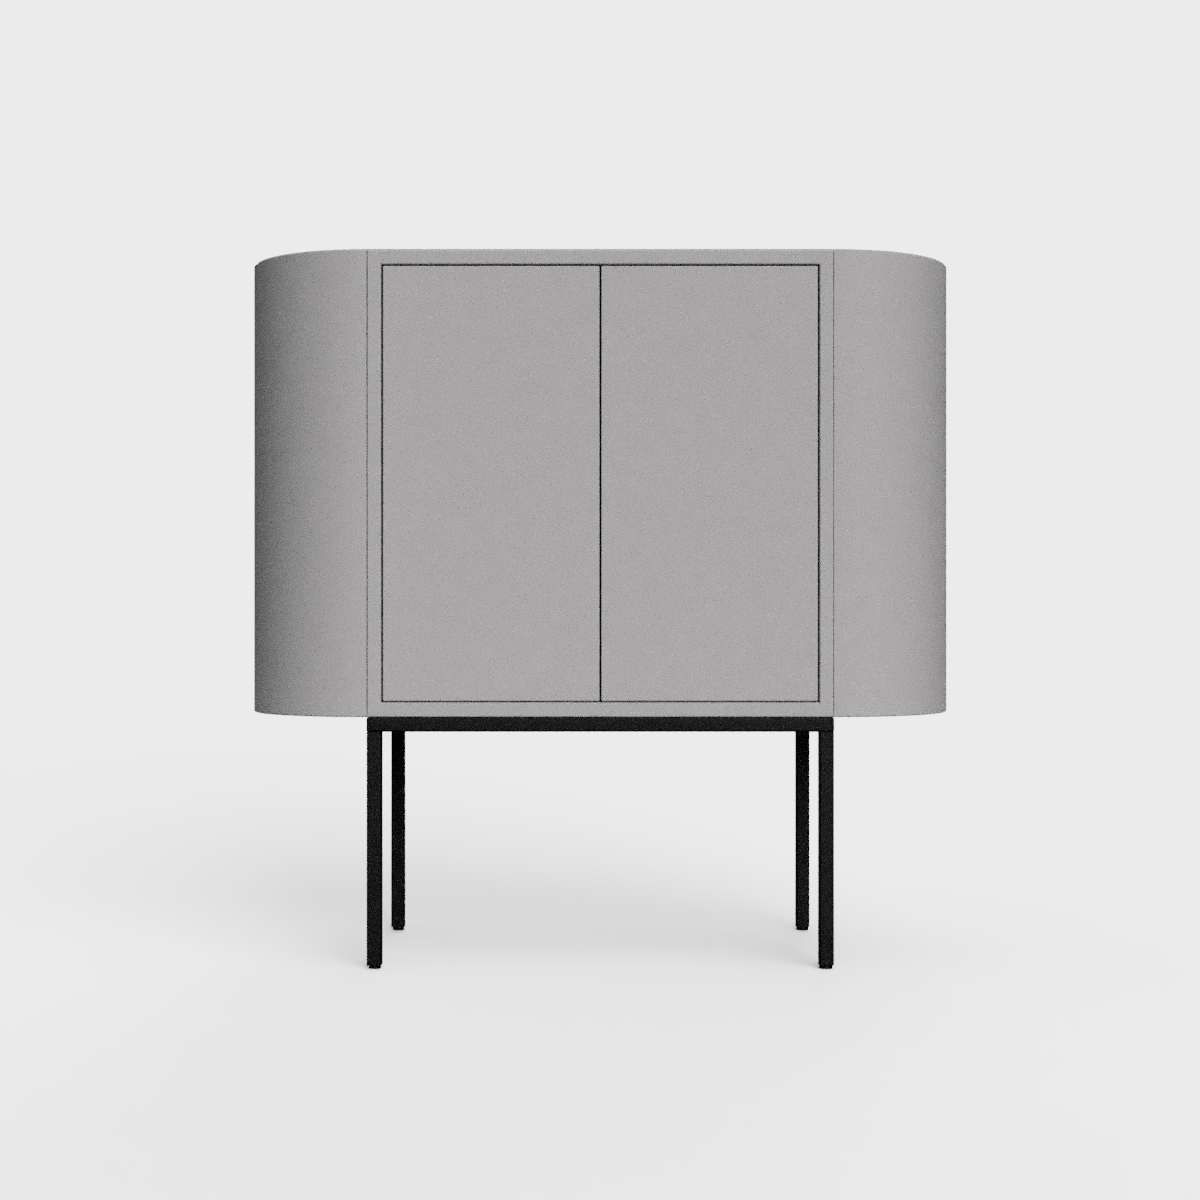 Siena 01 Sideboard in ashen gray color, powder-coated steel, elegant and modern piece of furniture for your living room